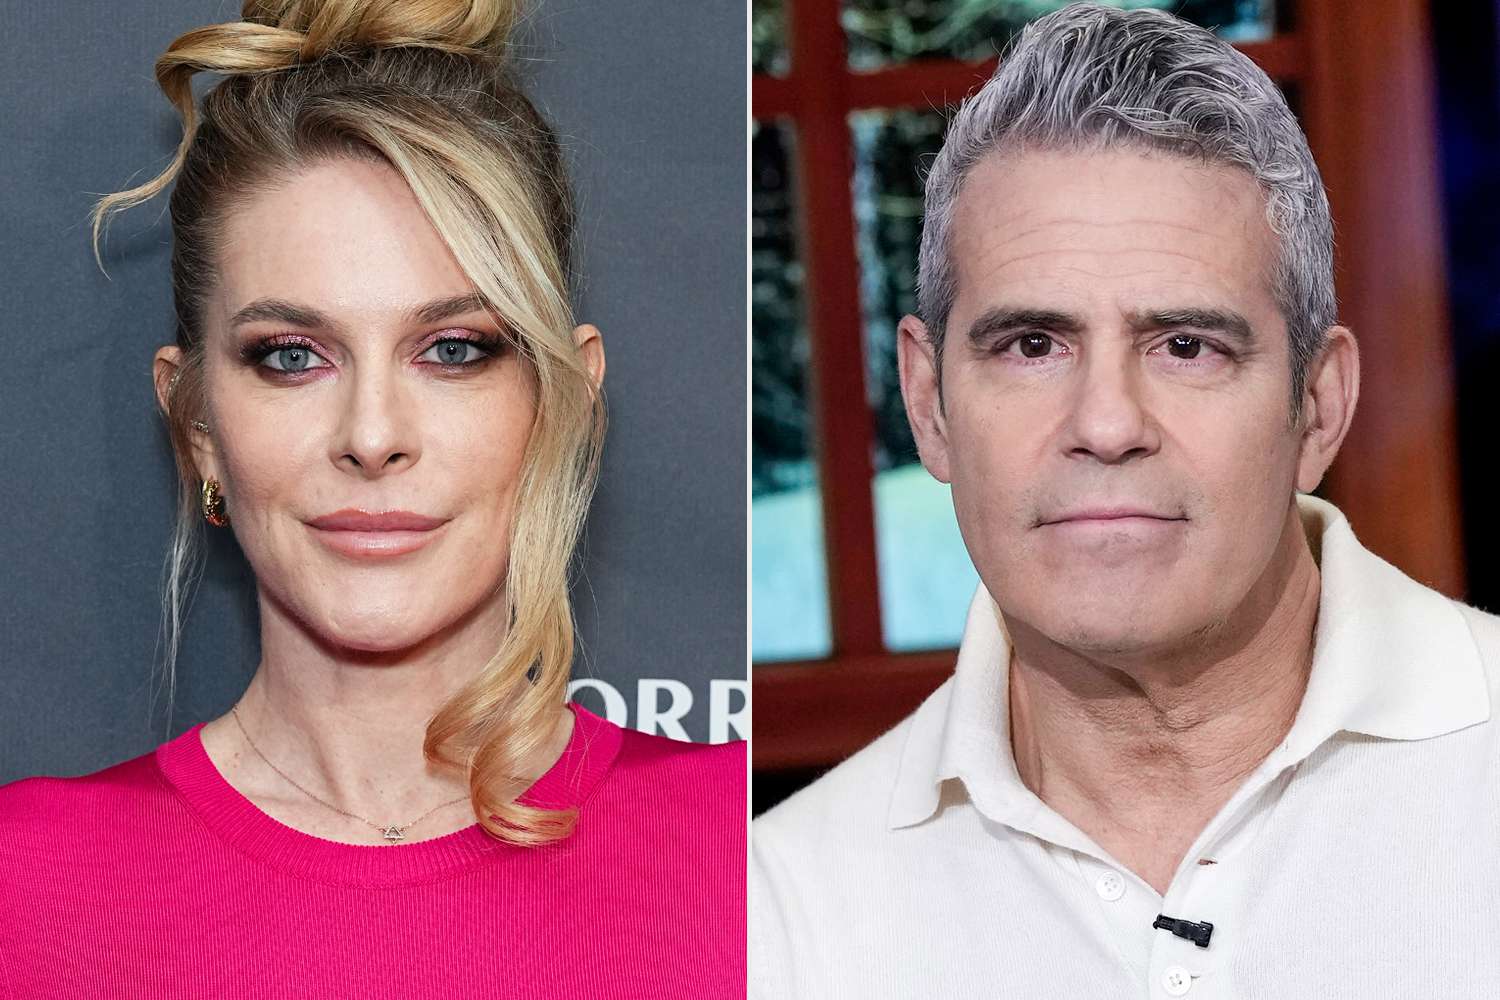 Leah McSweeney Sues Andy Cohen, Bravo For Discrimination